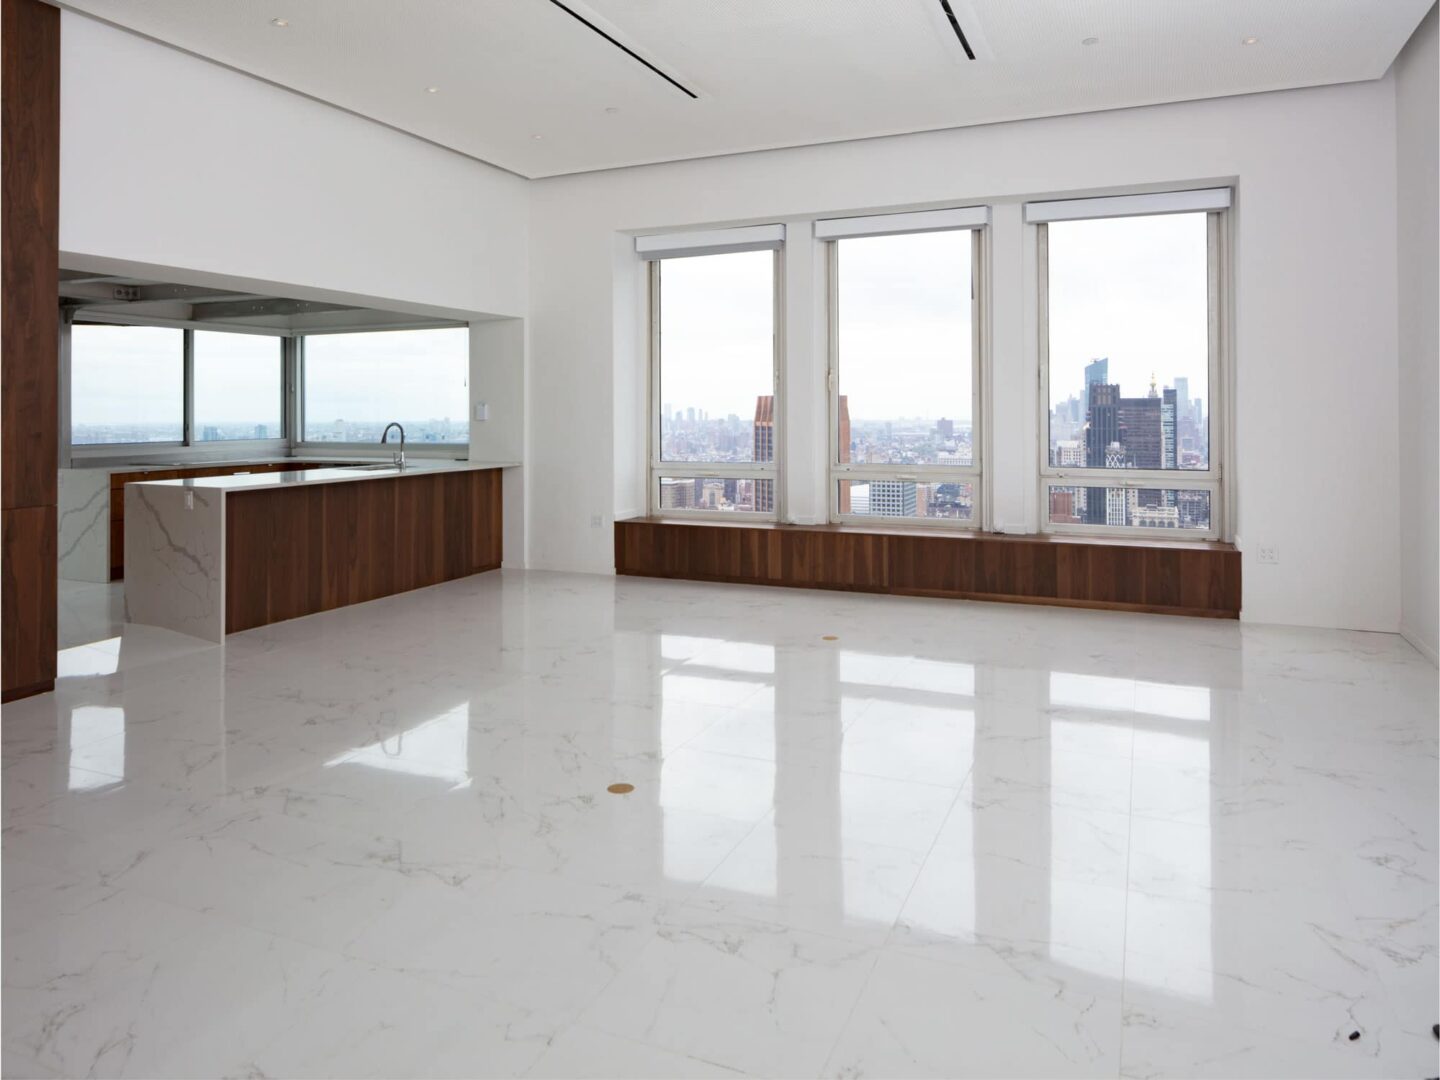 An empty room with marble floors and a view of the city.